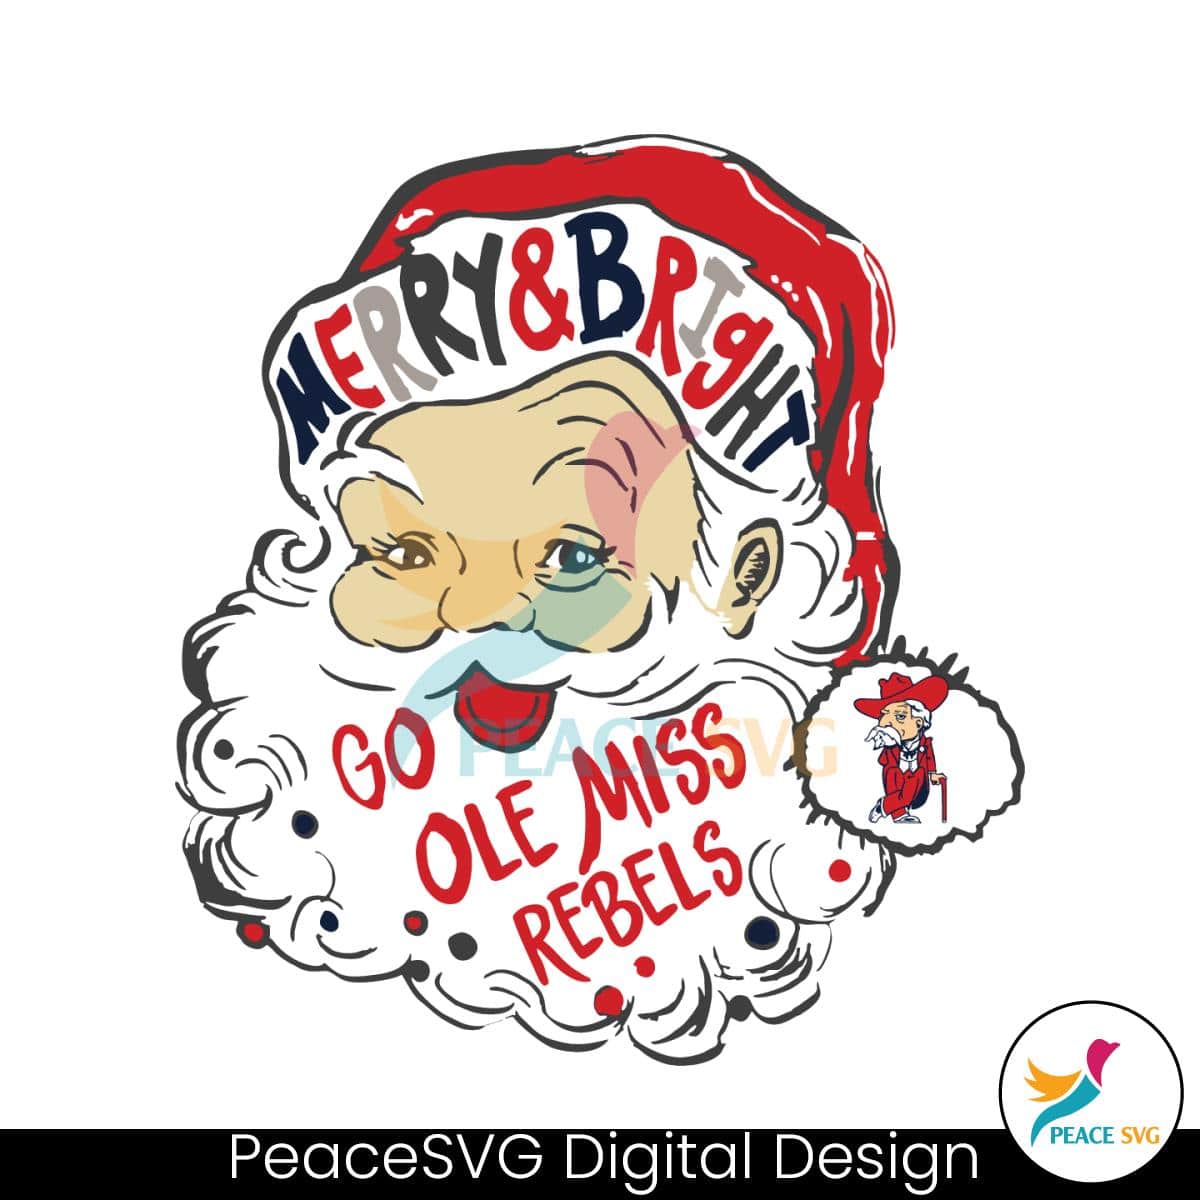 santa-merry-and-bright-go-ole-miss-rebels-svg